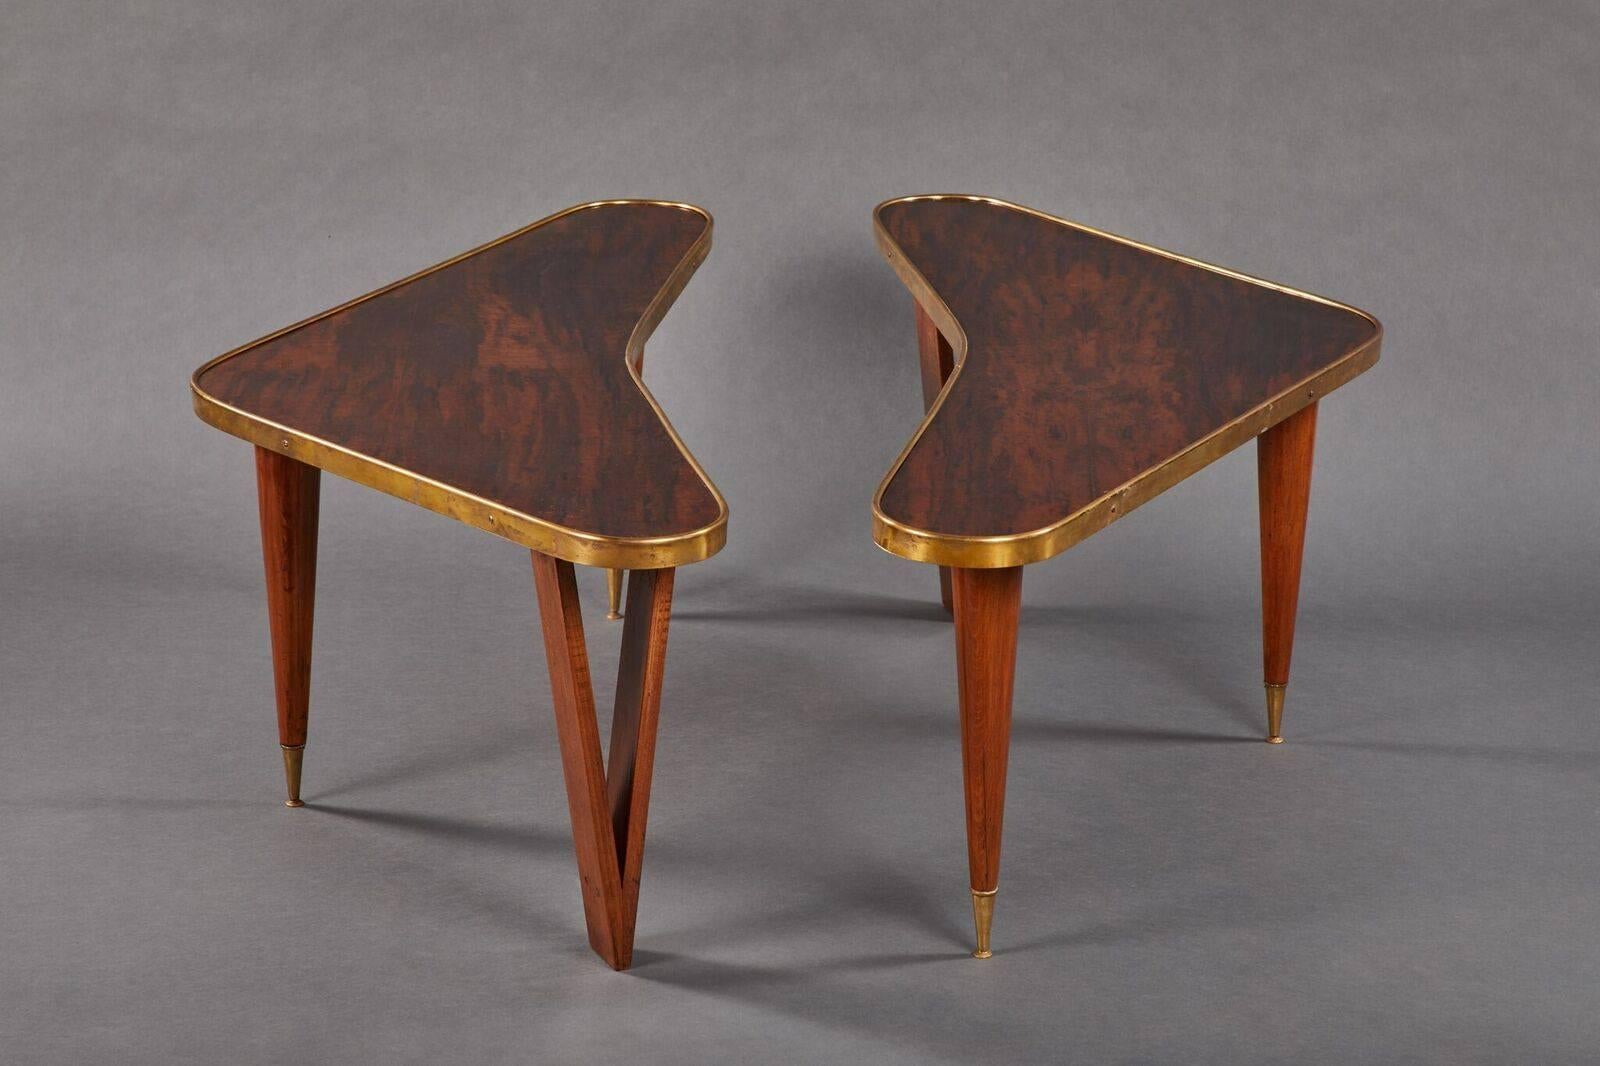 Exceptional pair of curvilinear, biomorphic rosewood coffee tables with brass gallery trim and sabots. Tables show some signs of wear and brass has an exquisite and warm patina.

 